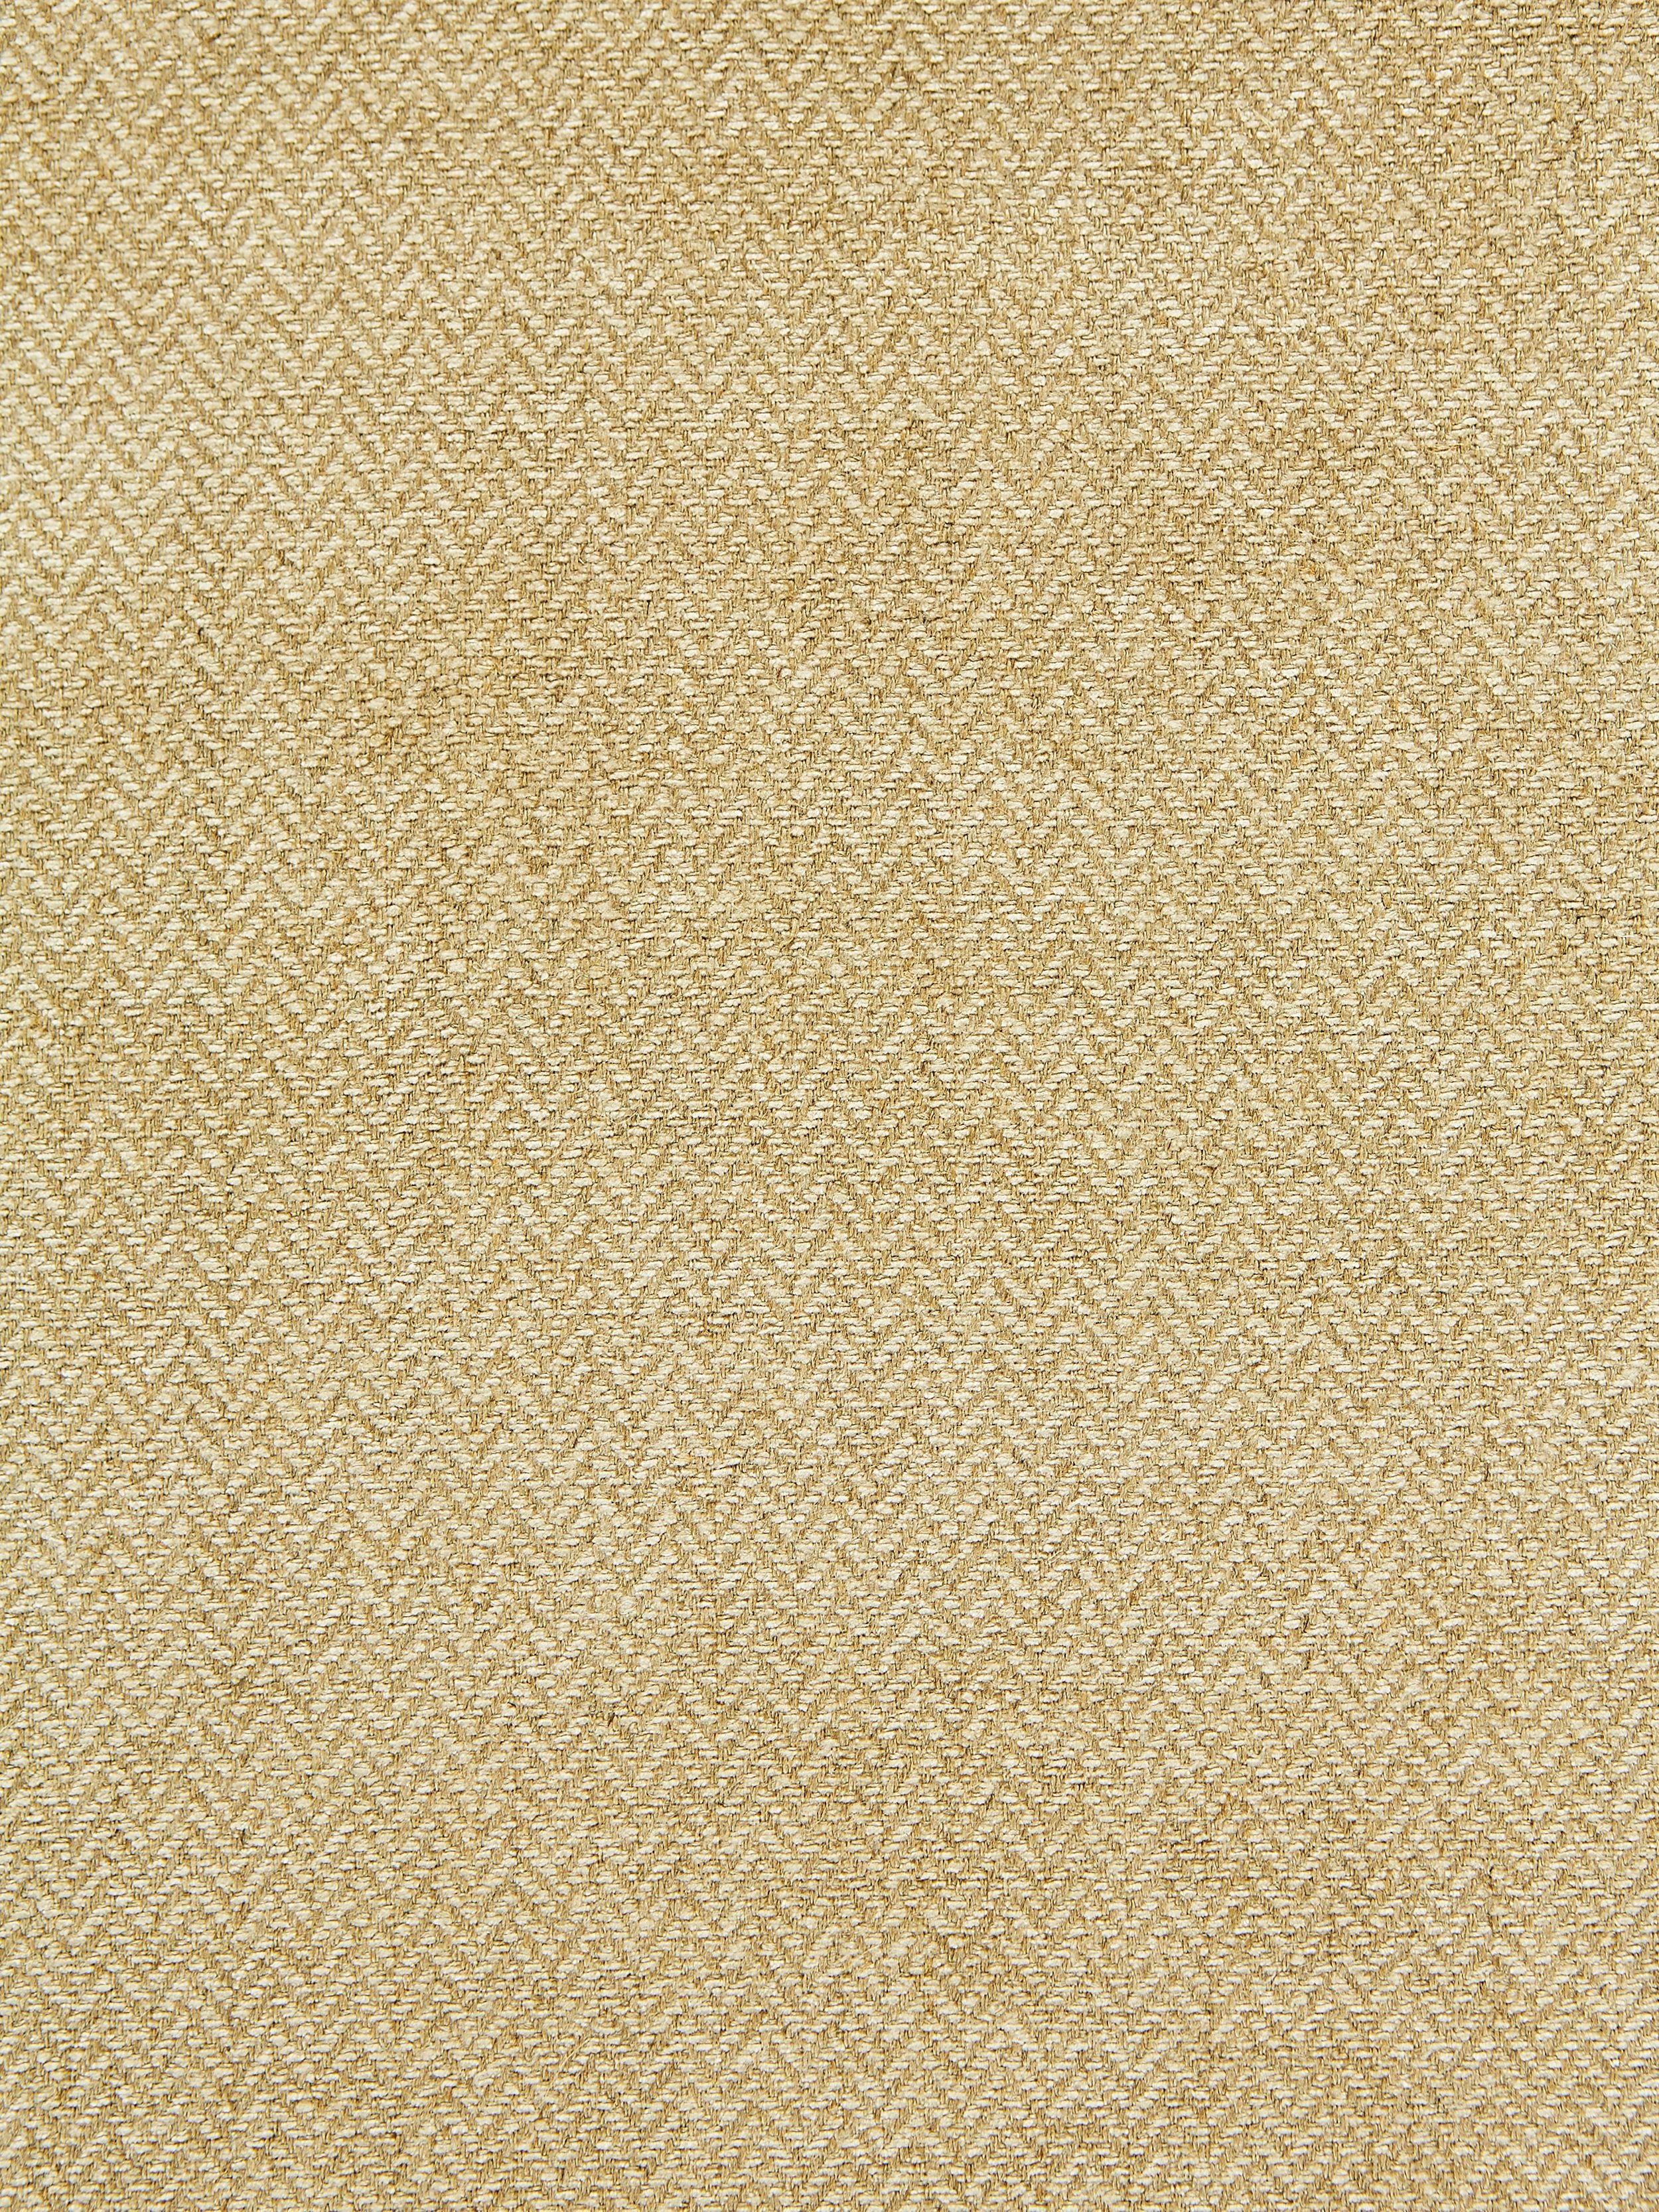 Oxford Herringbone Weave fabric in greige color - pattern number SC 000227006 - by Scalamandre in the Scalamandre Fabrics Book 1 collection